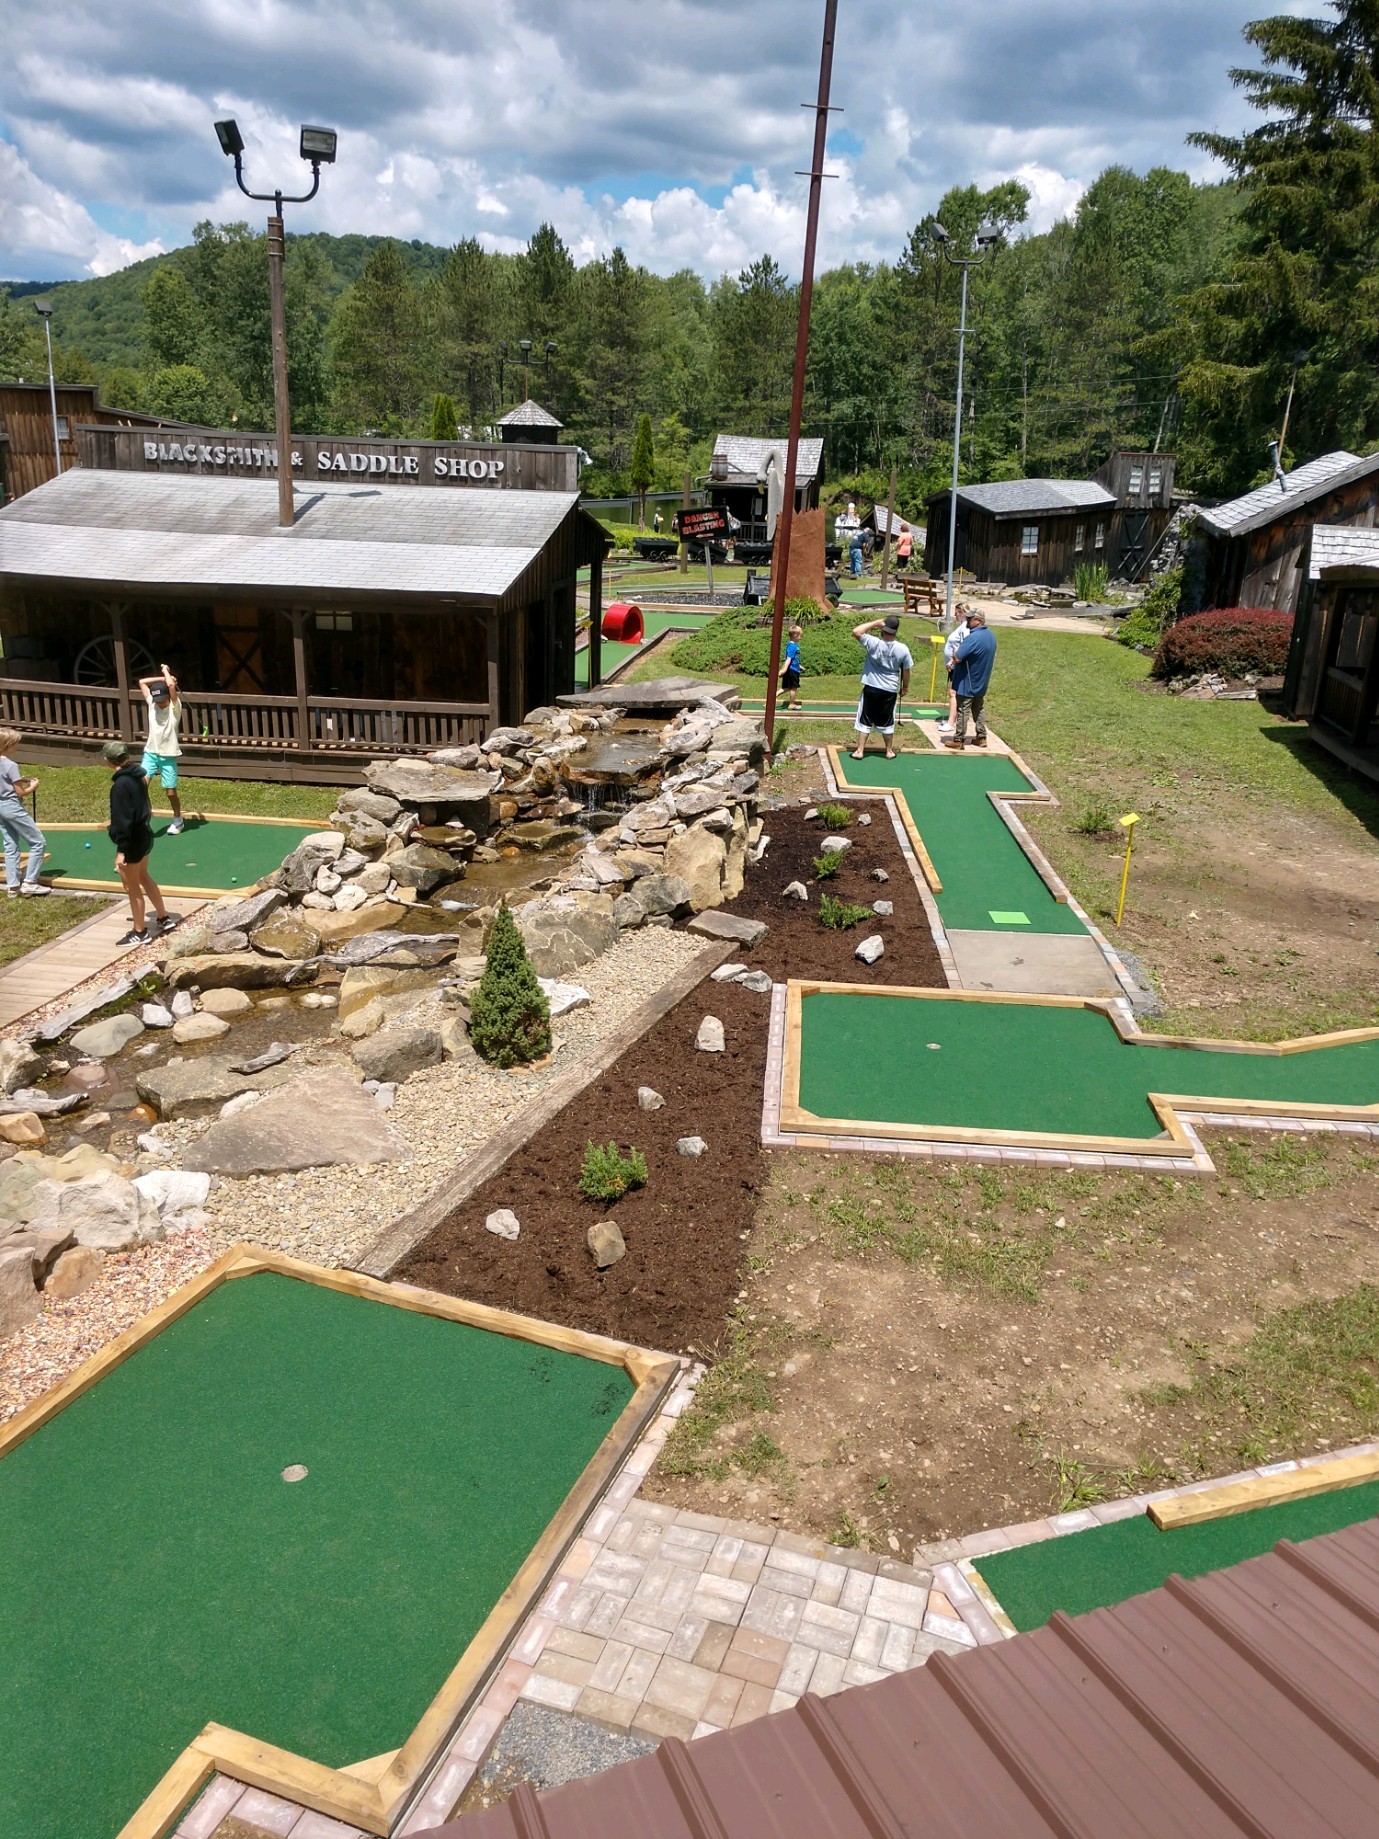 Visit Potter-Tioga Gary's Putter Golf and Jiffy Pup